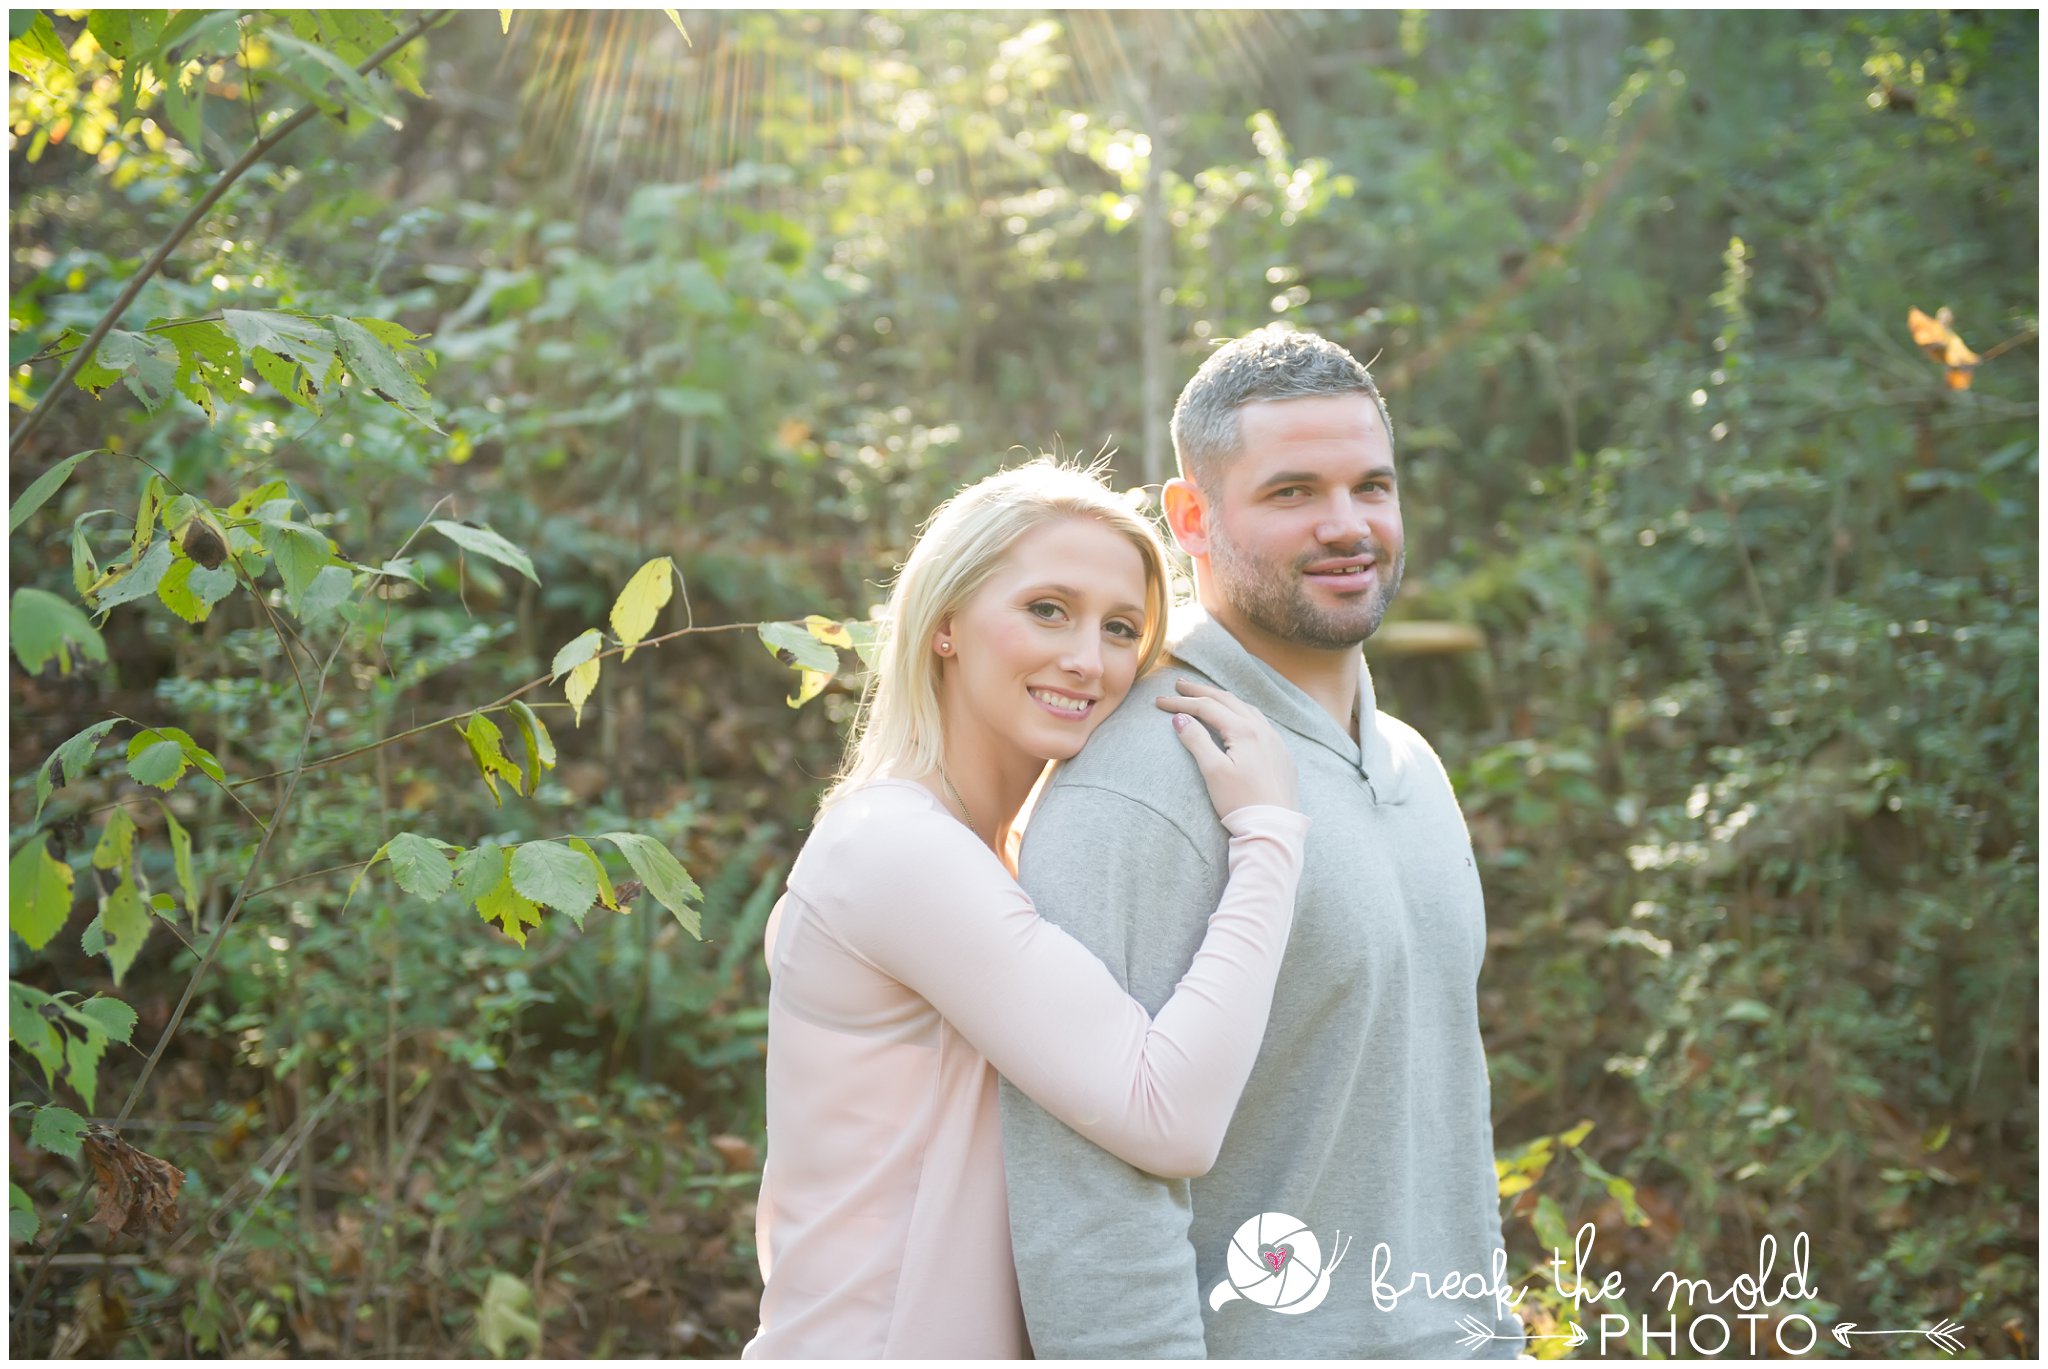 break-the-mold-photo-knoxville-tn-lenoir-city-downtown-outdoor-hiking-engagement-session_1995.jpg